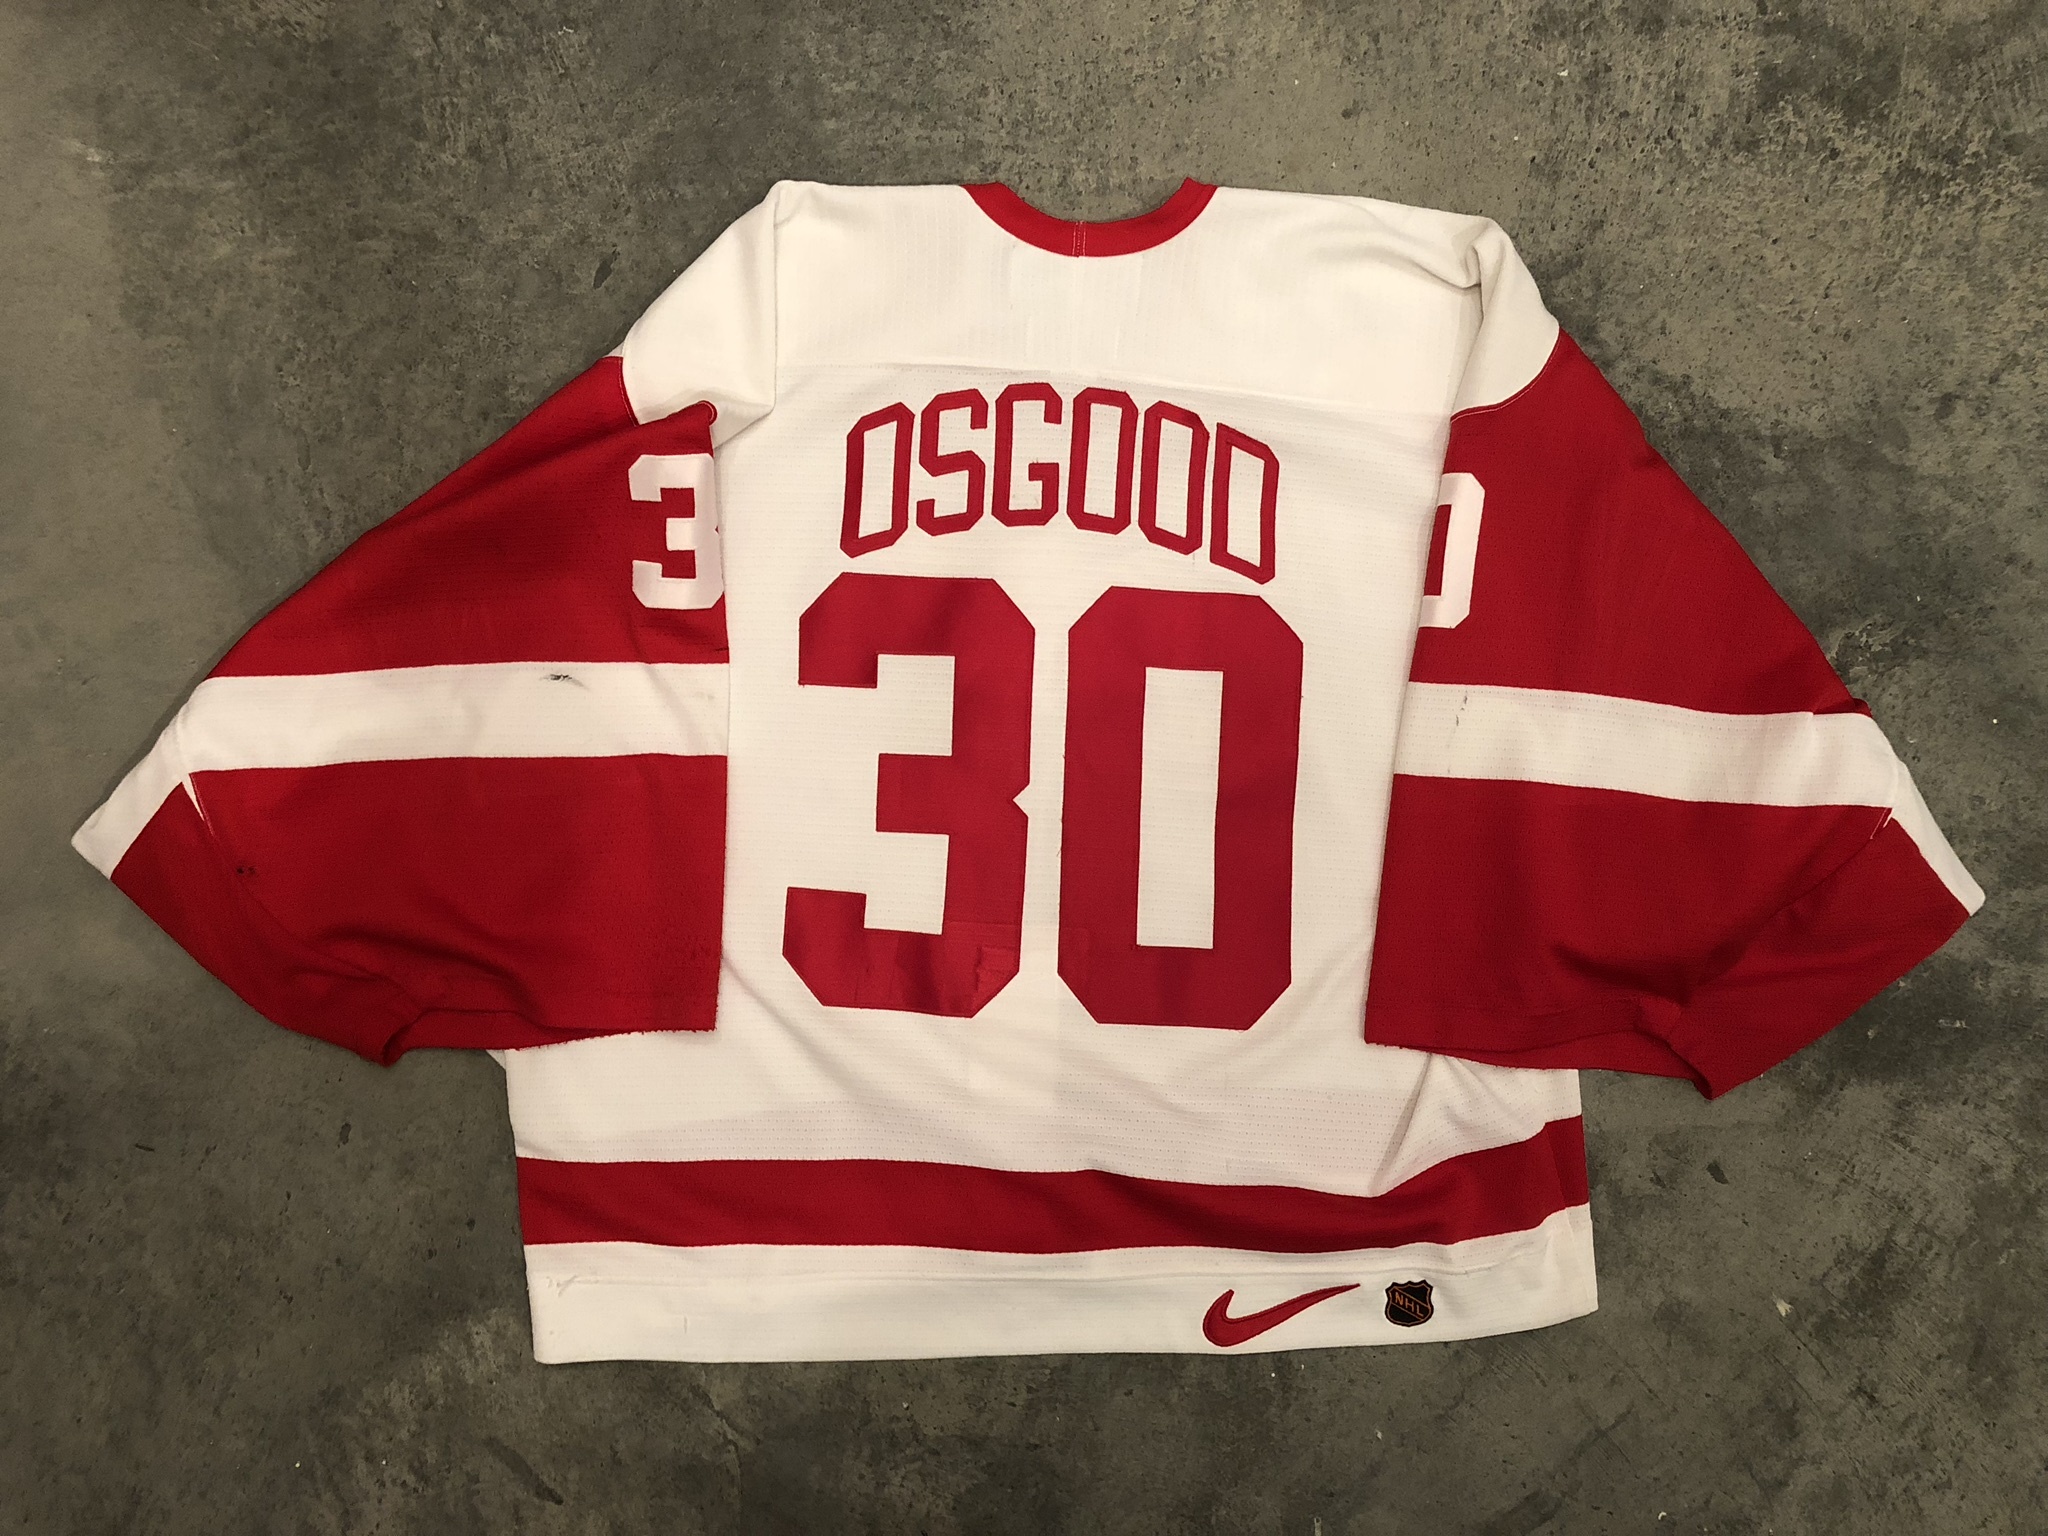 Reddit user creates custom Red Wings jersey as a gift for Christmas -  Article - Bardown